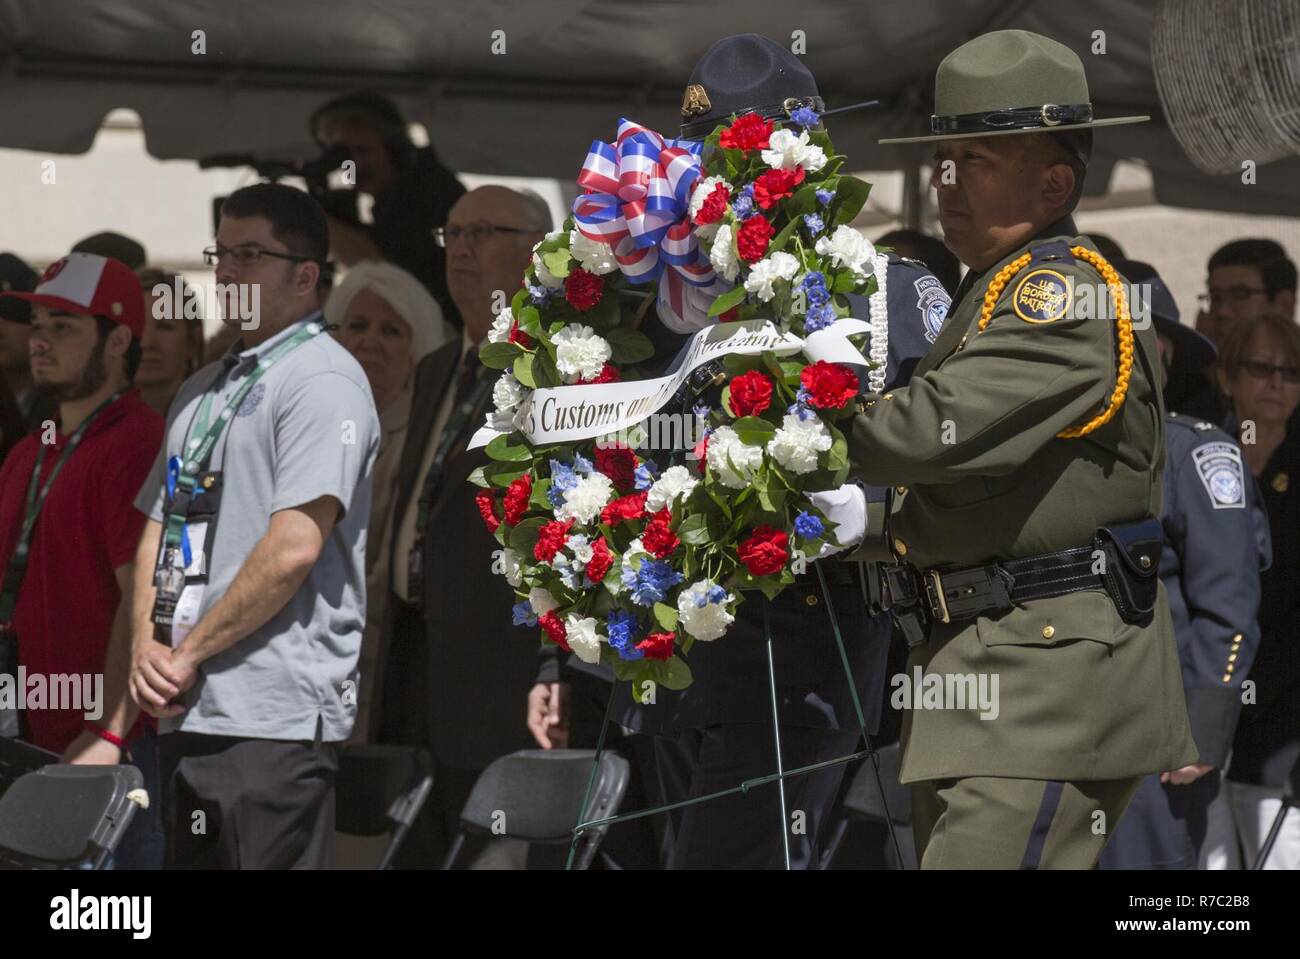 U.S. Border Patrol Agents carry a wreath to the stage during the U.S. Customs and Border Protection Valor Memorial and Wreath Laying Ceremony in the Woodrow Wilson Plaza of the Ronald Reagan Building in Washington, D.C., May 16, 2017. U.S. Customs and Border Protection Stock Photo